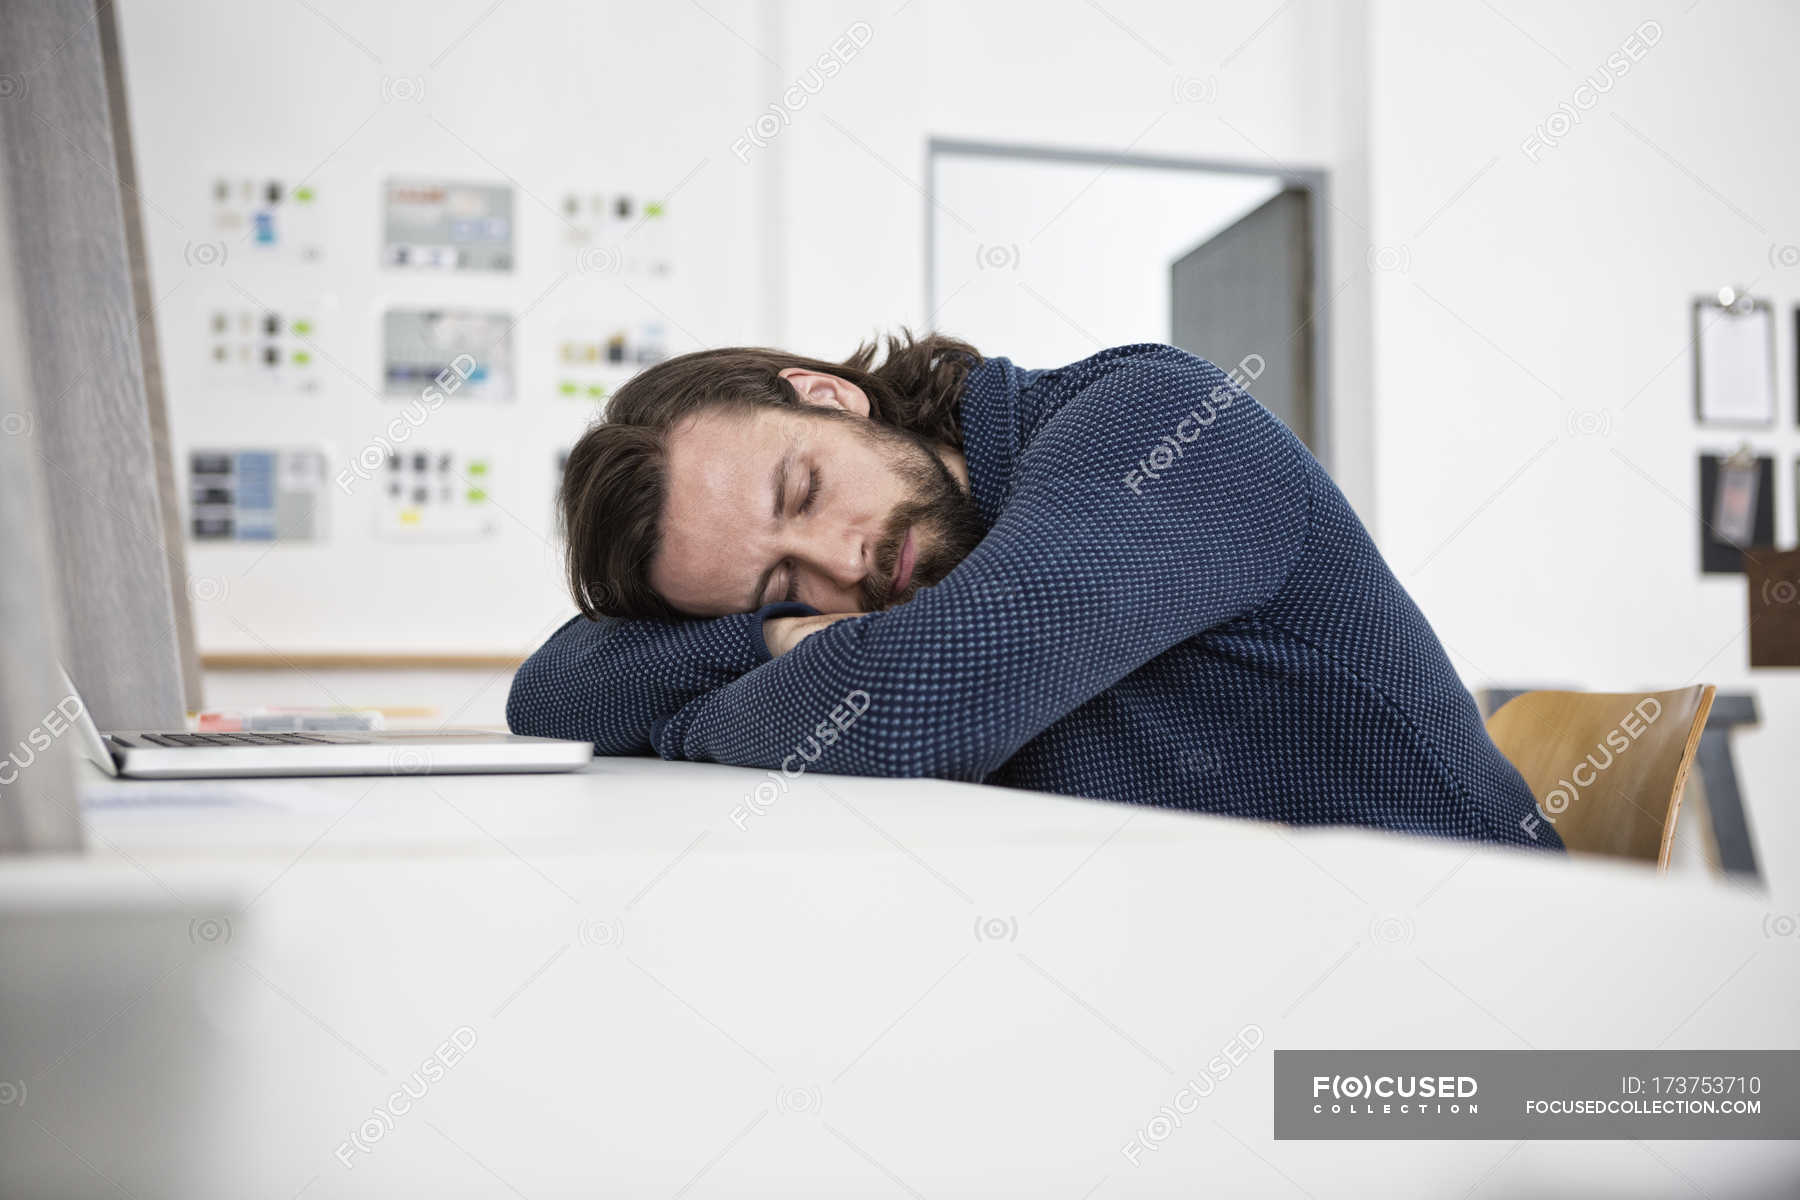 Man Sleeping On Desk In Office Startup Differential Focus